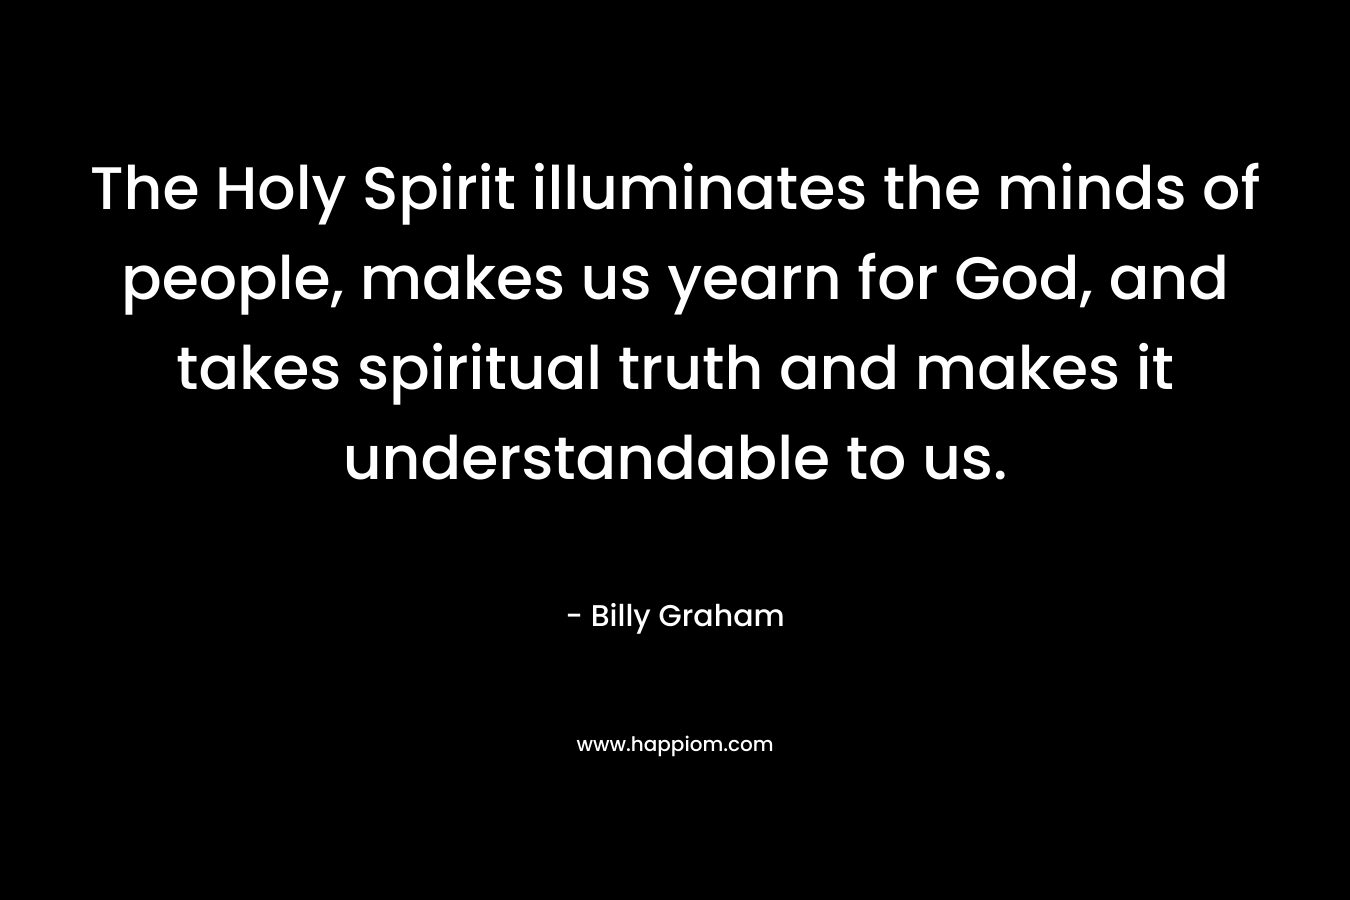 The Holy Spirit illuminates the minds of people, makes us yearn for God, and takes spiritual truth and makes it understandable to us.